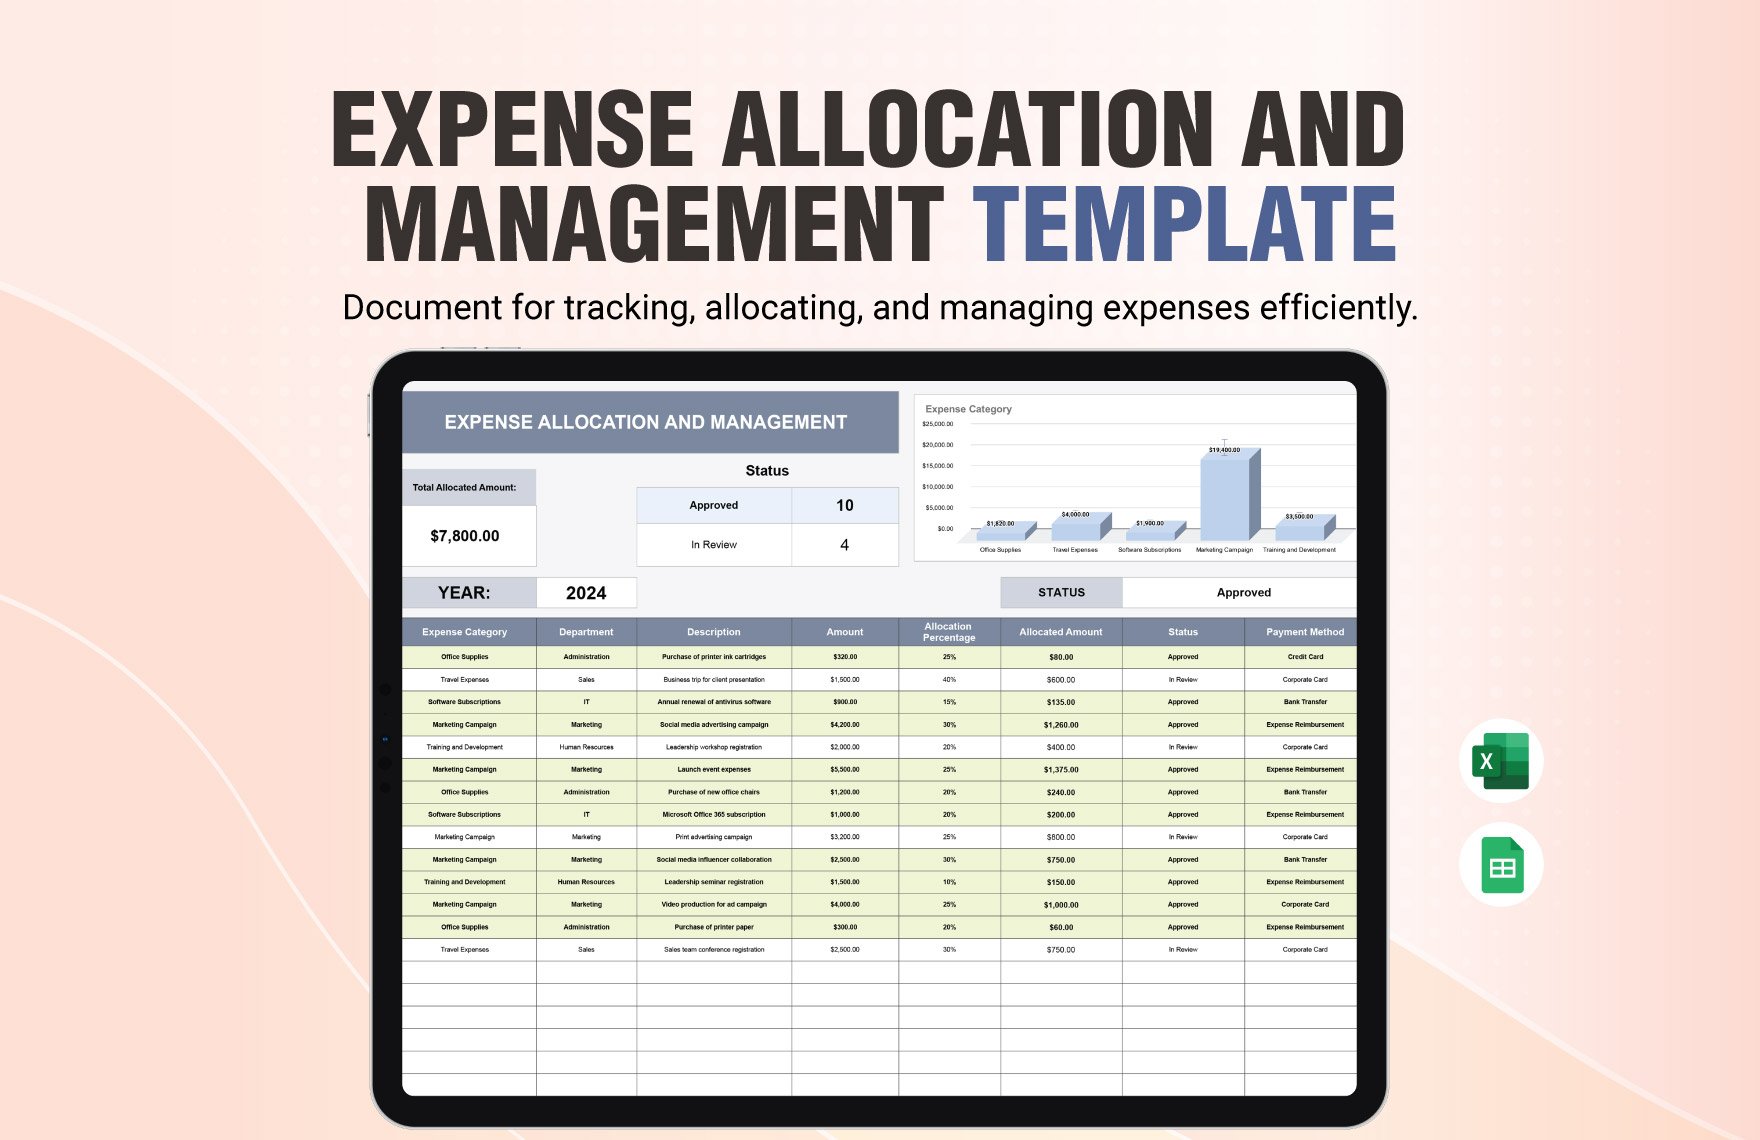 Expense Allocation and Management Template in Excel, Google Sheets